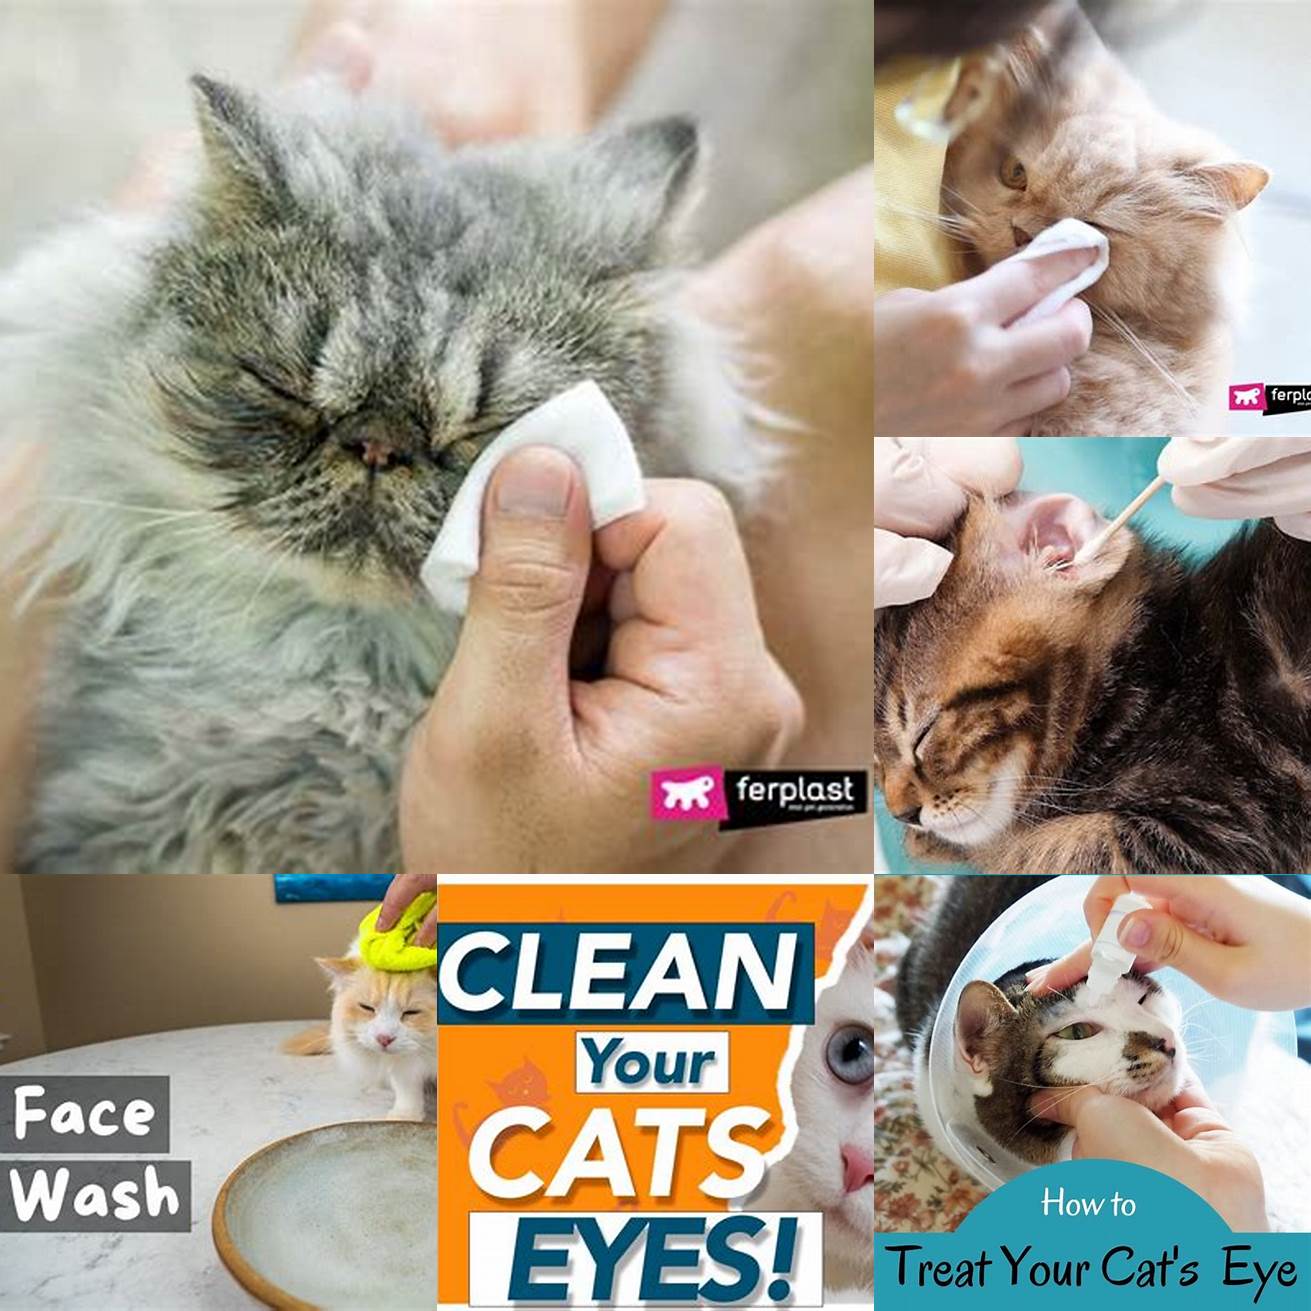 Clean your cats eyes and nose